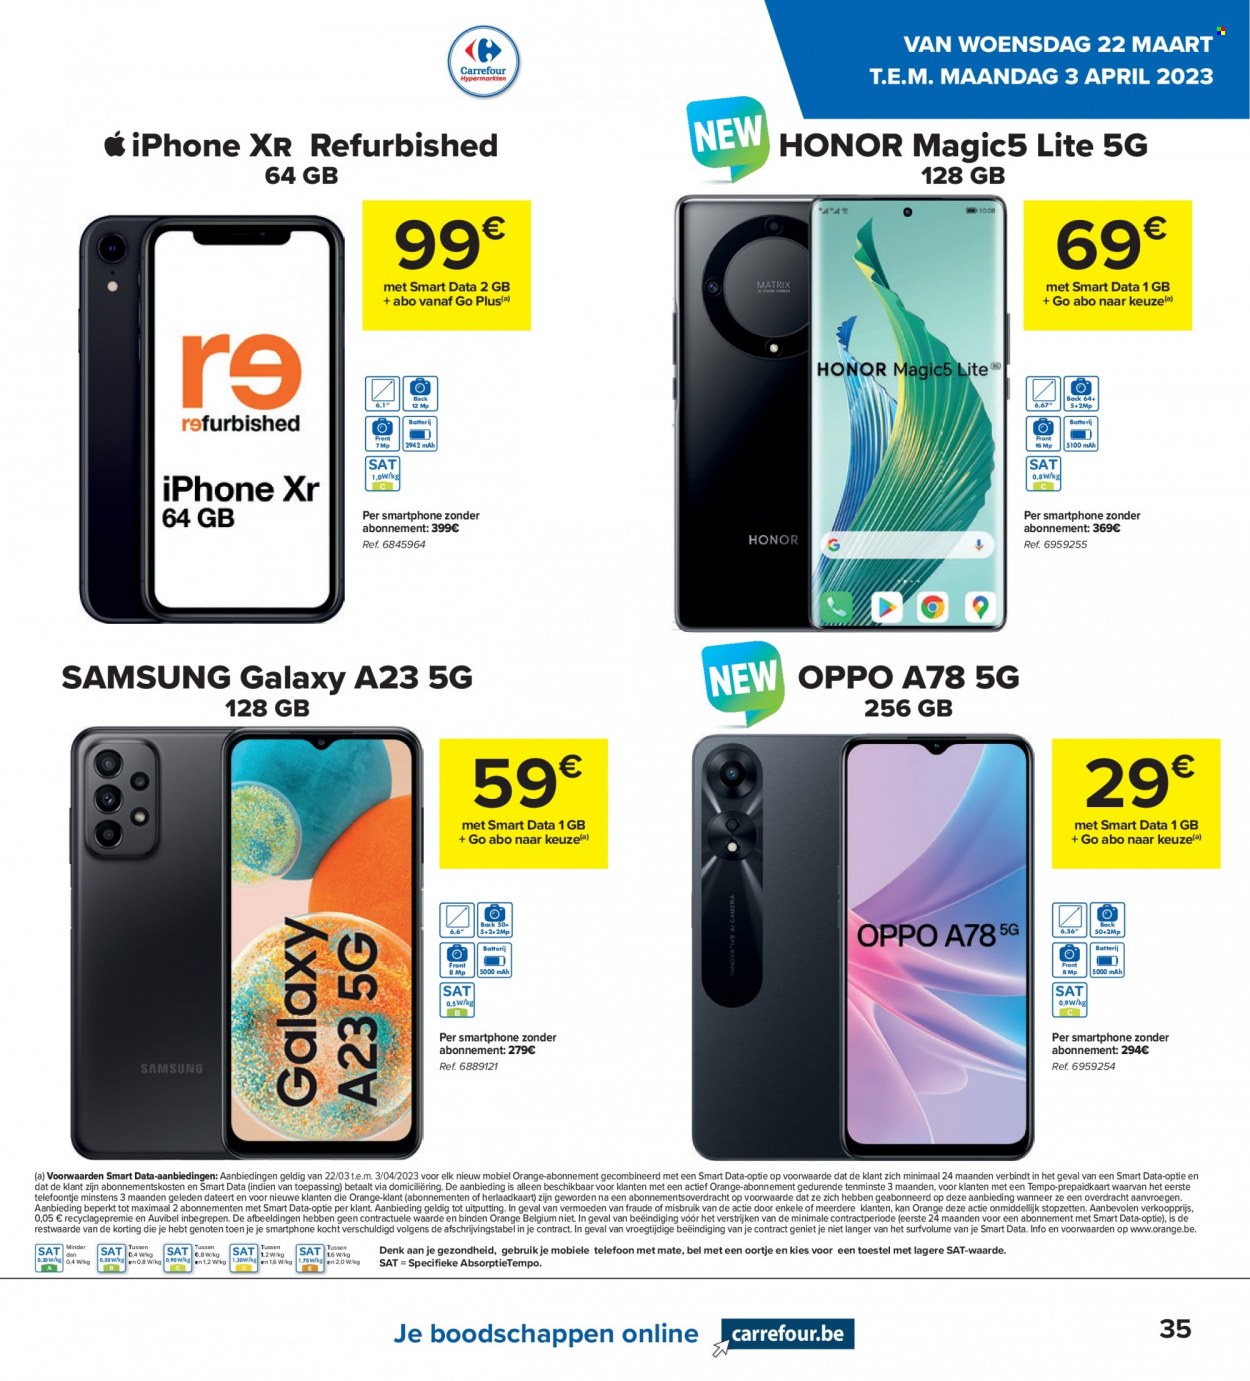 thumbnail - Catalogue Carrefour hypermarkt - 22/03/2023 - 03/04/2023 - Produits soldés - Samsung, smartphone, iPhone, iPhone XR, Oppo, Honor. Page 15.